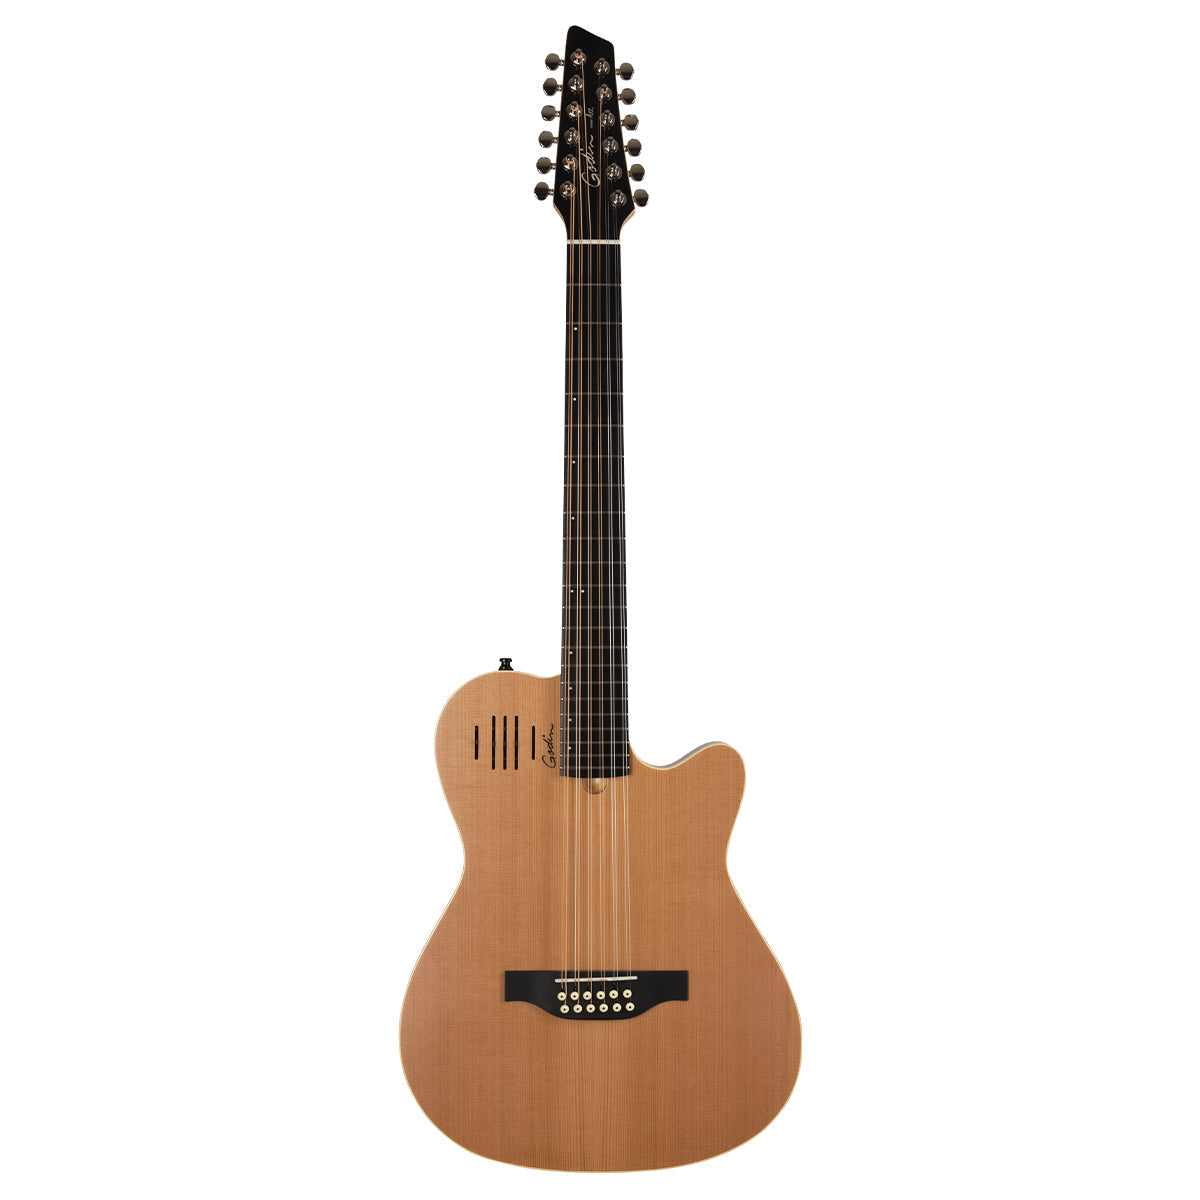 Godin A12 12 String Electric Guitar ~ Natural, Electric Guitar for sale at Richards Guitars.